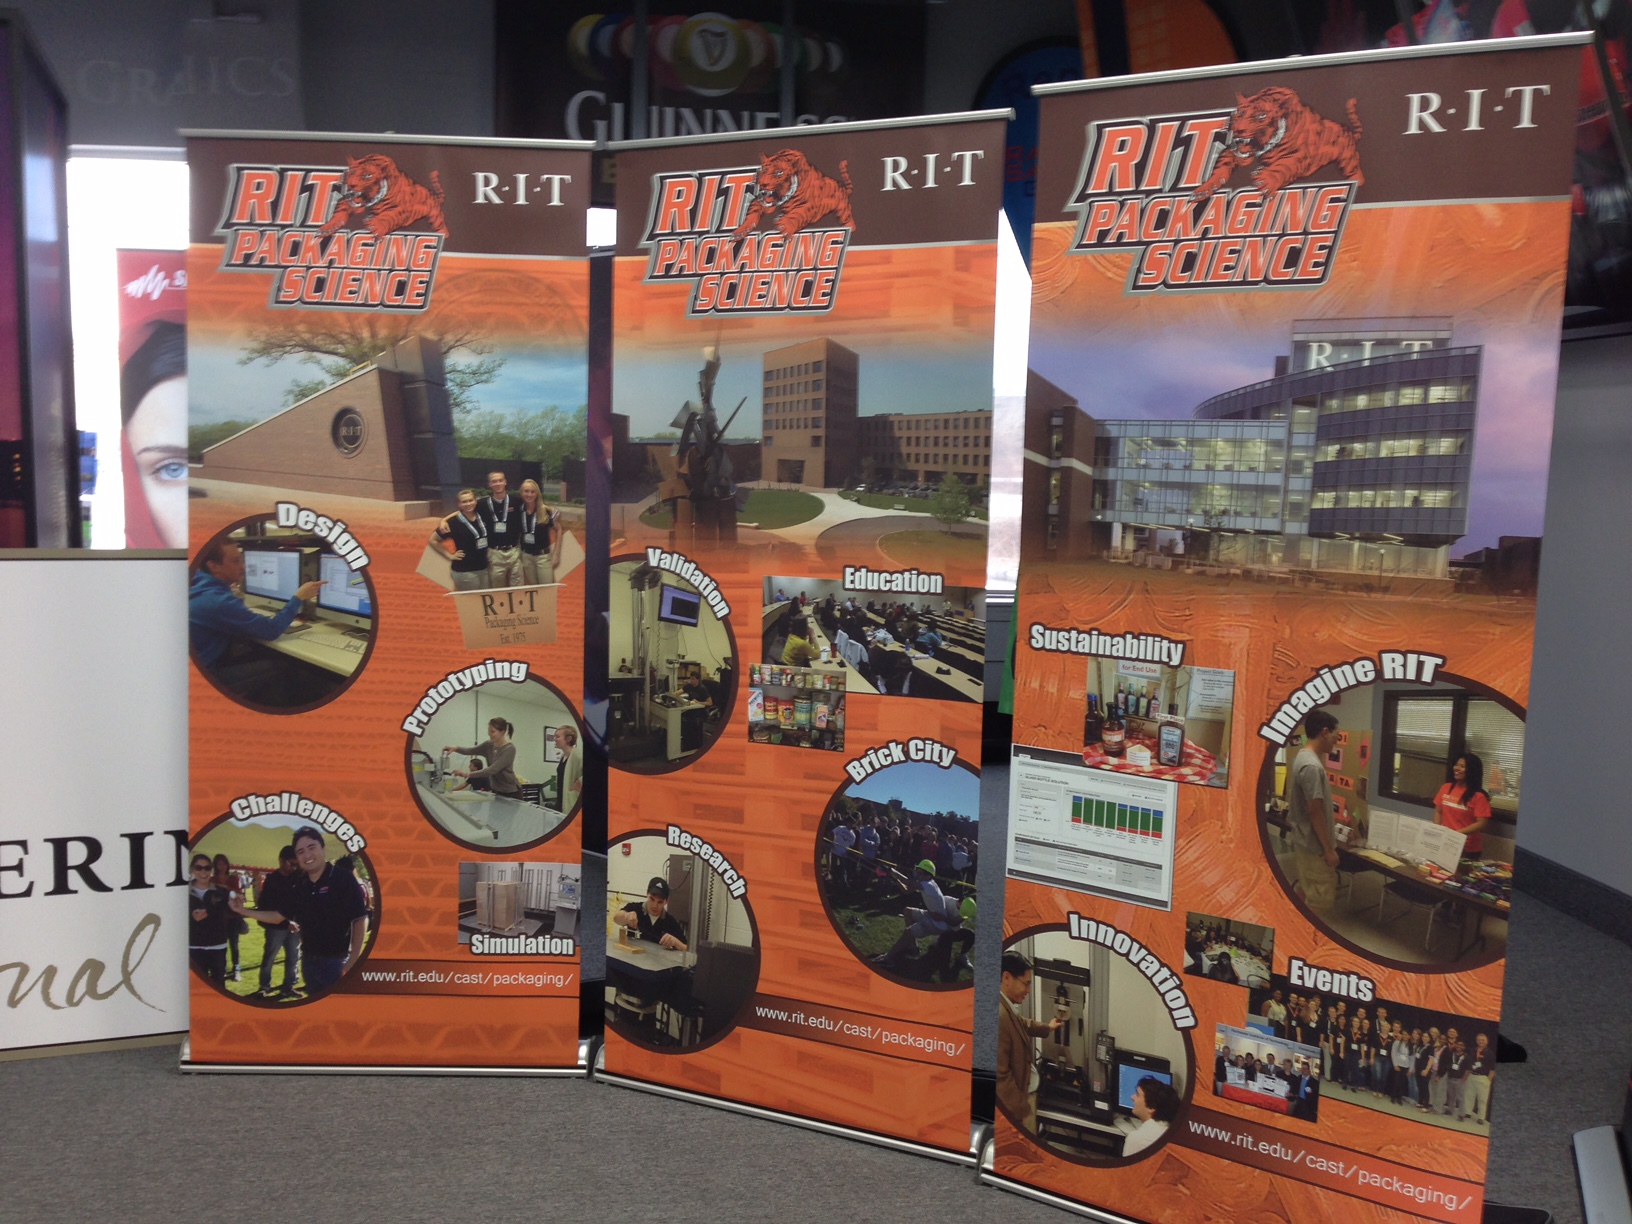 Three RIT Packaging banner stands with services